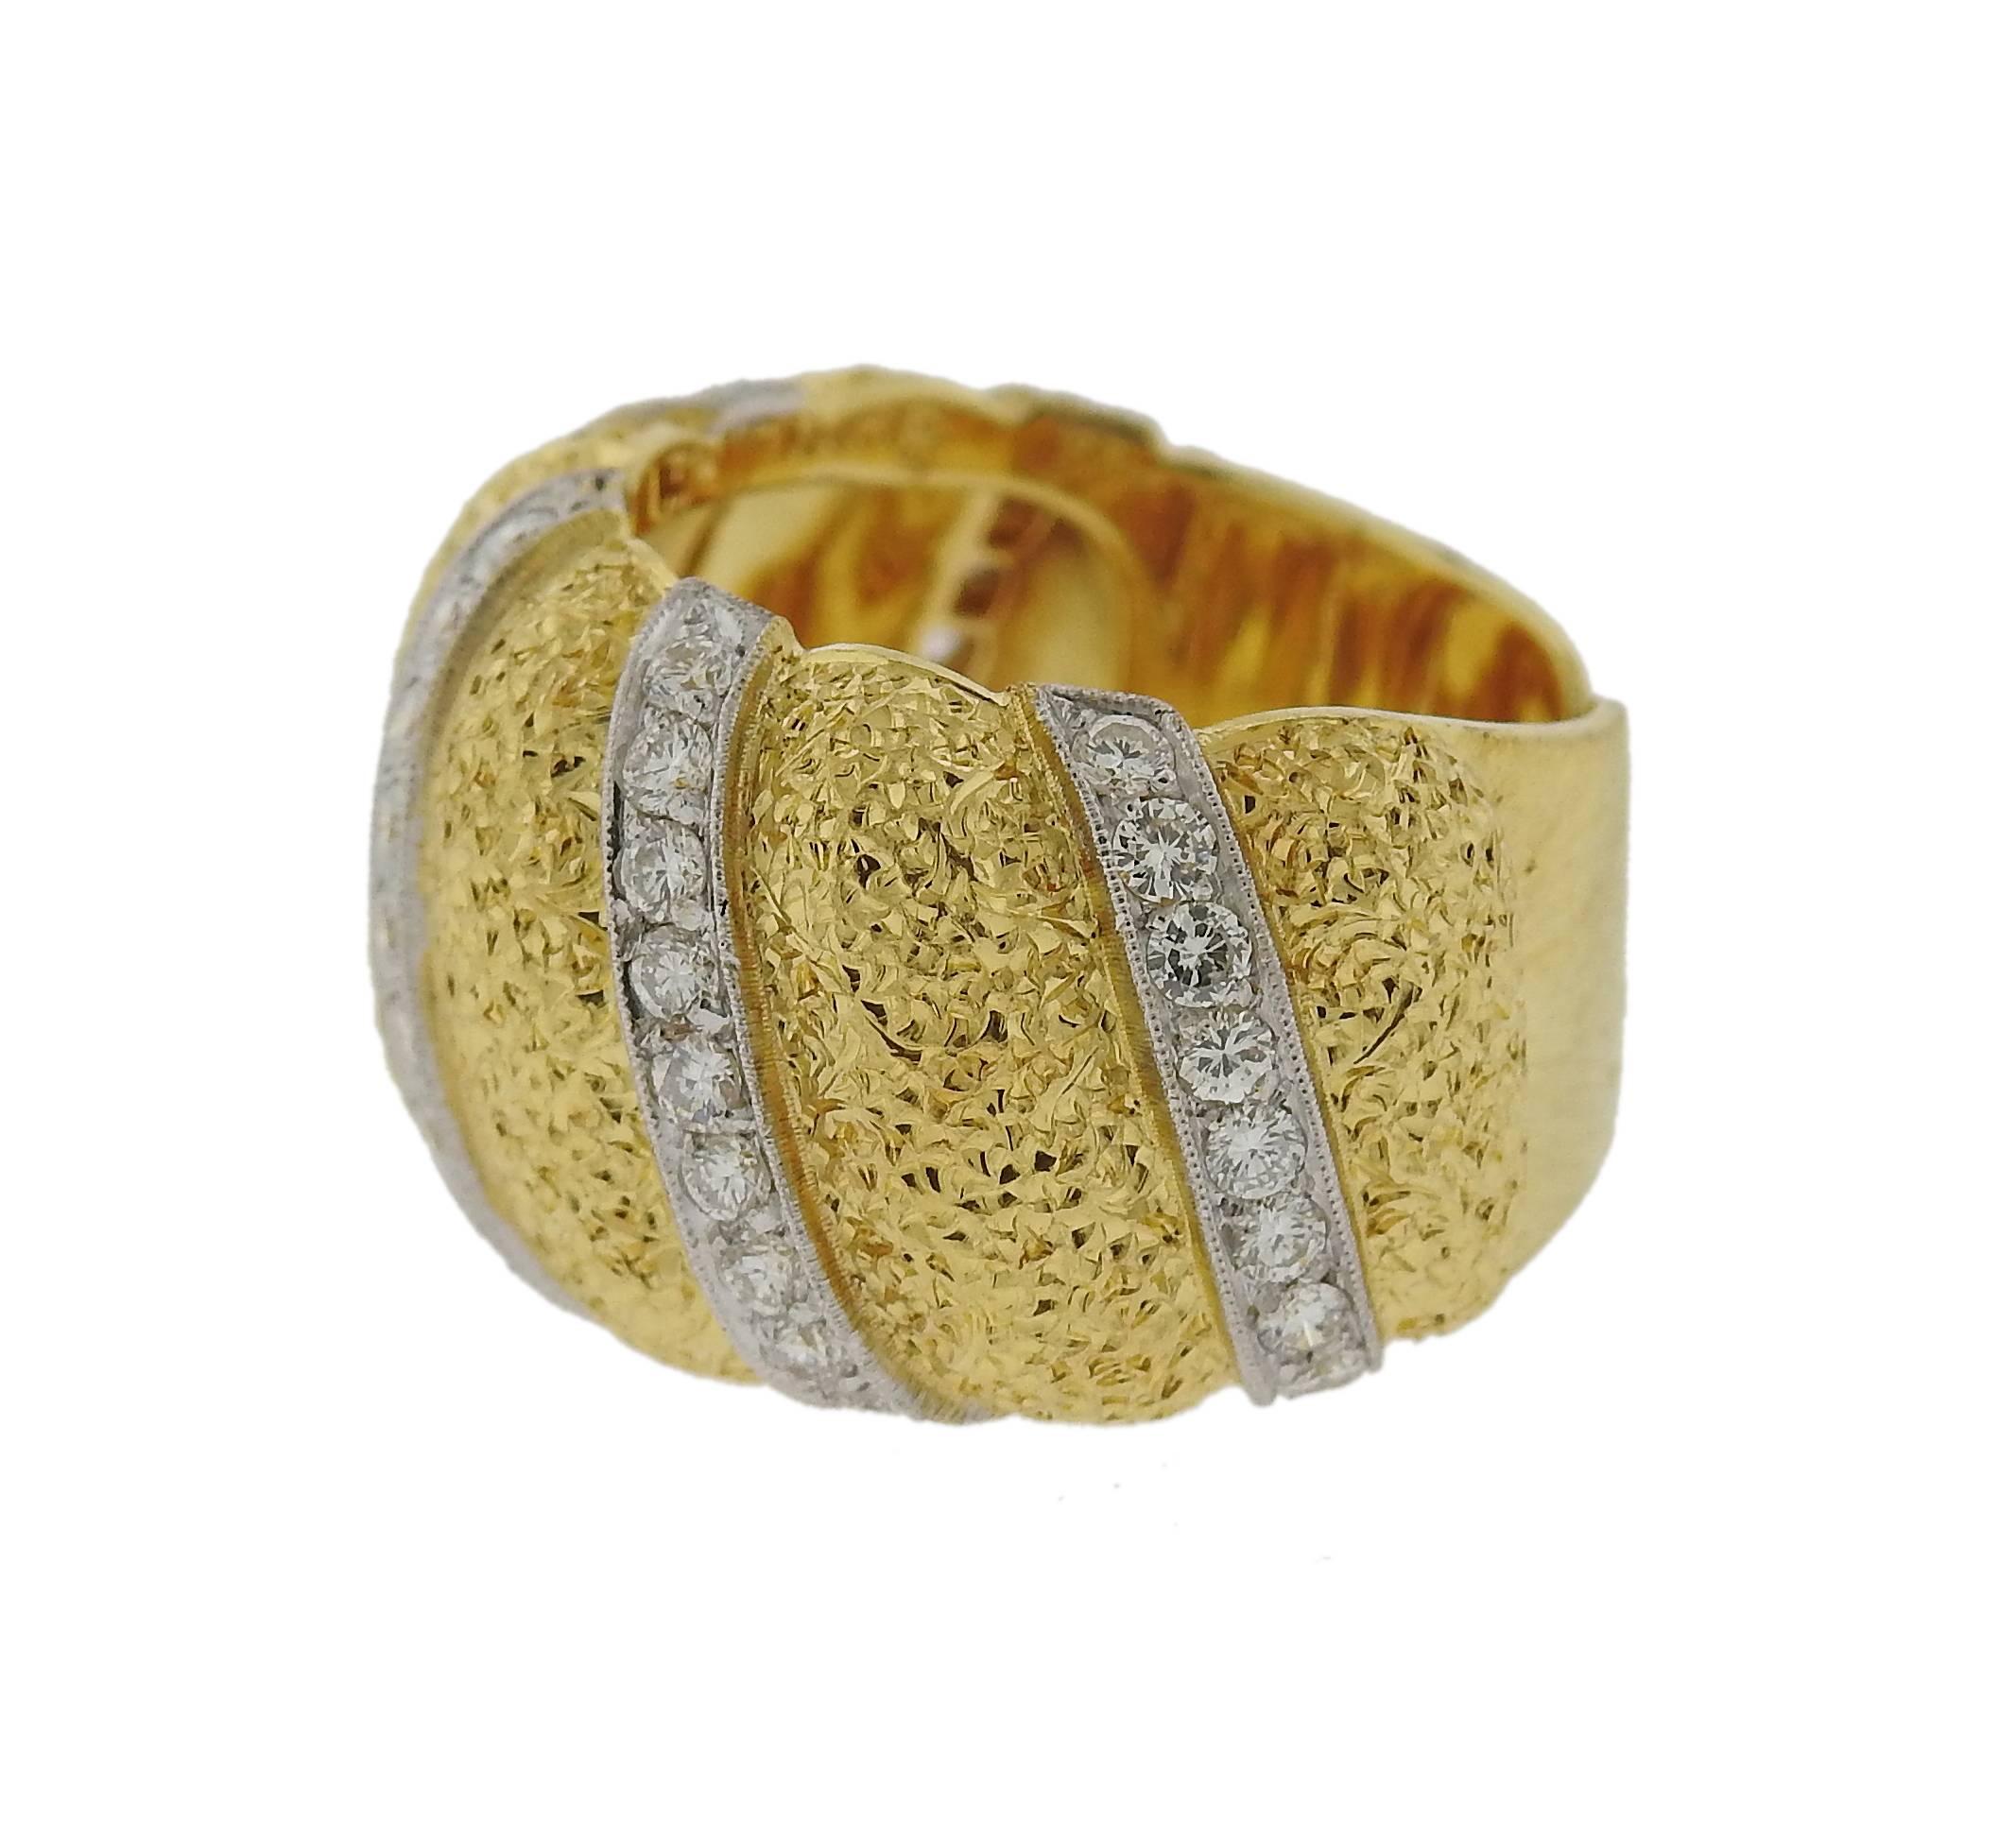 Wide 18k gold ring, crafted by Bucellati, set with approximately 0.80ctw in diamonds, featuring open cuff shank design.  Ring is a size 6 and is 14mm wide. Weighs 14.6 grams. Marked: Gianmaria Buccellati, Italy 18k 
Retail $24530